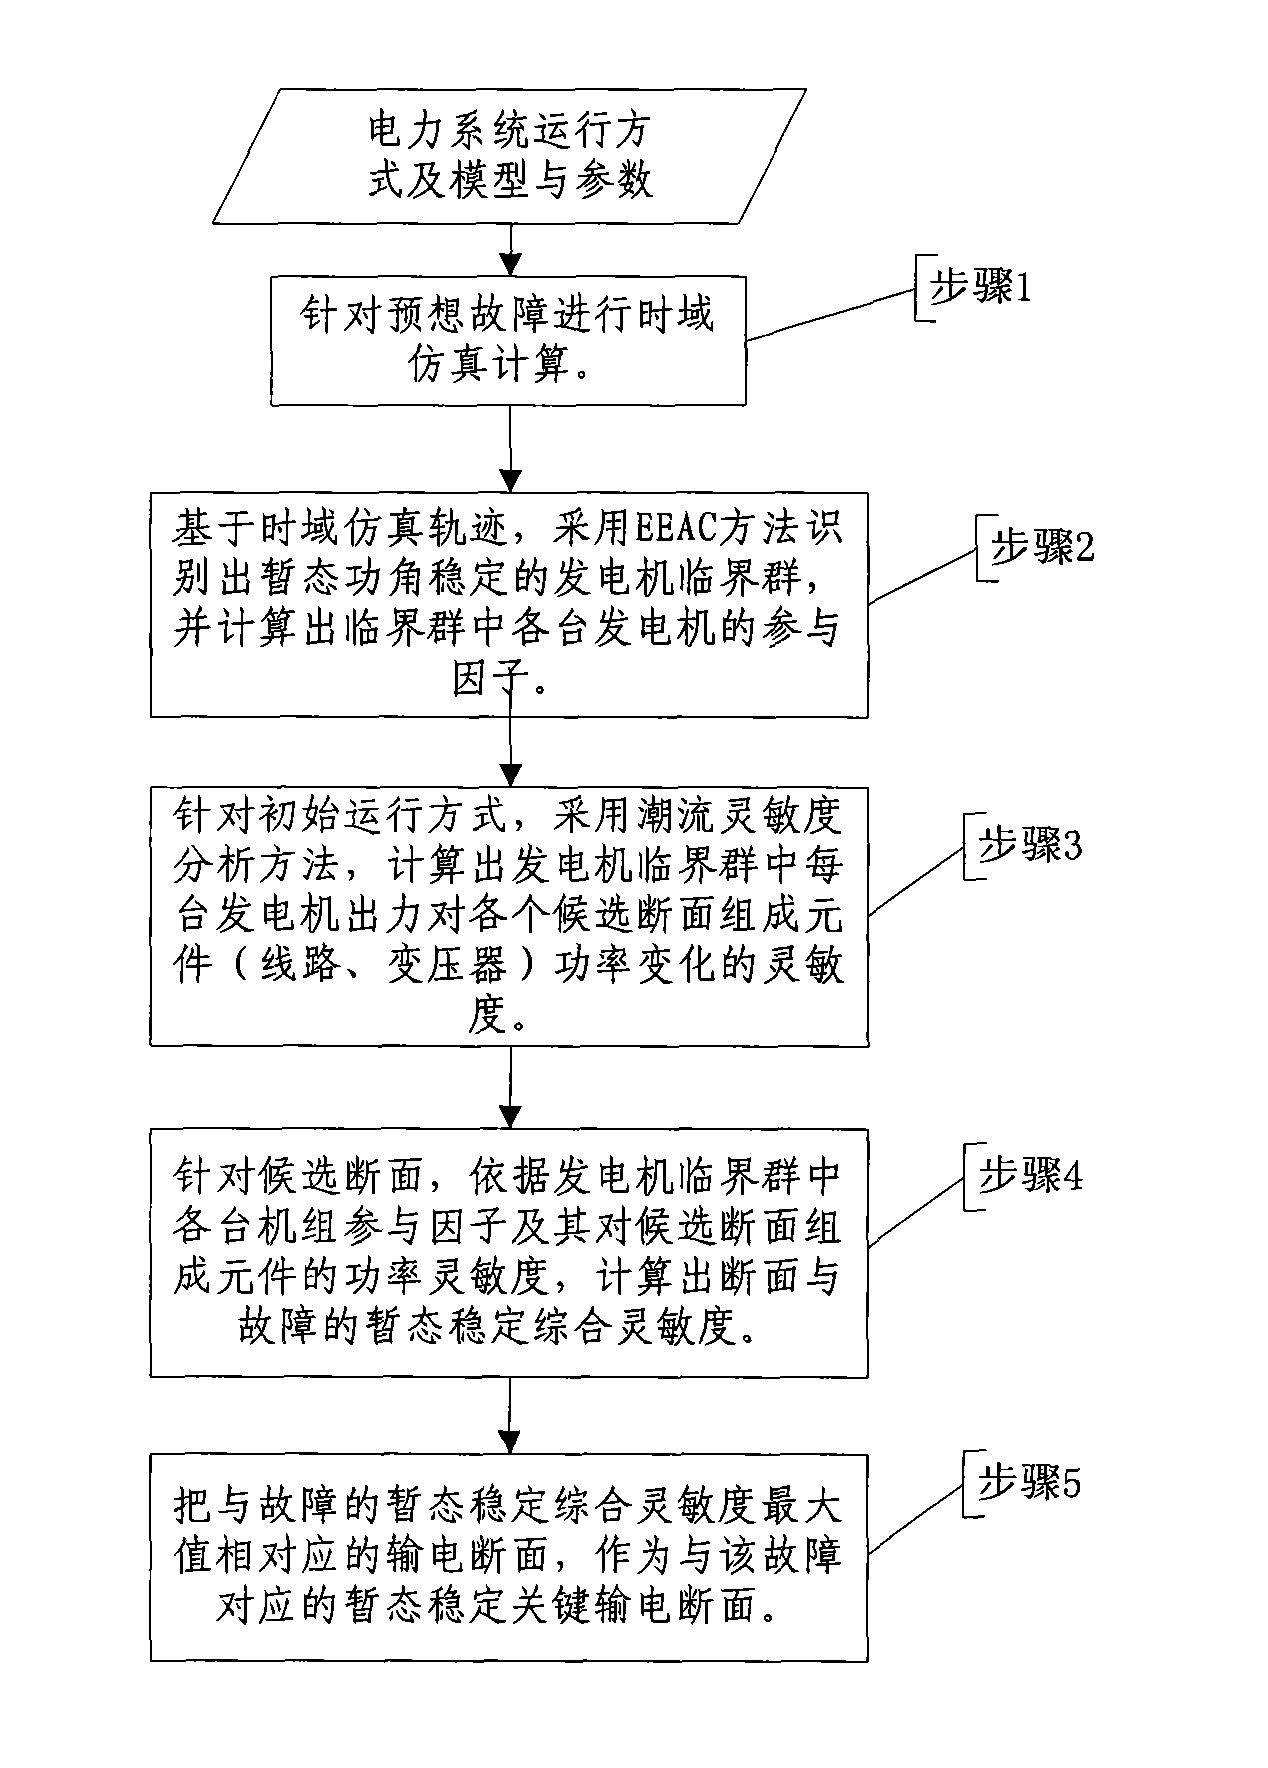 Identification method of transient state stable key transmission cross-section of electric power system fault